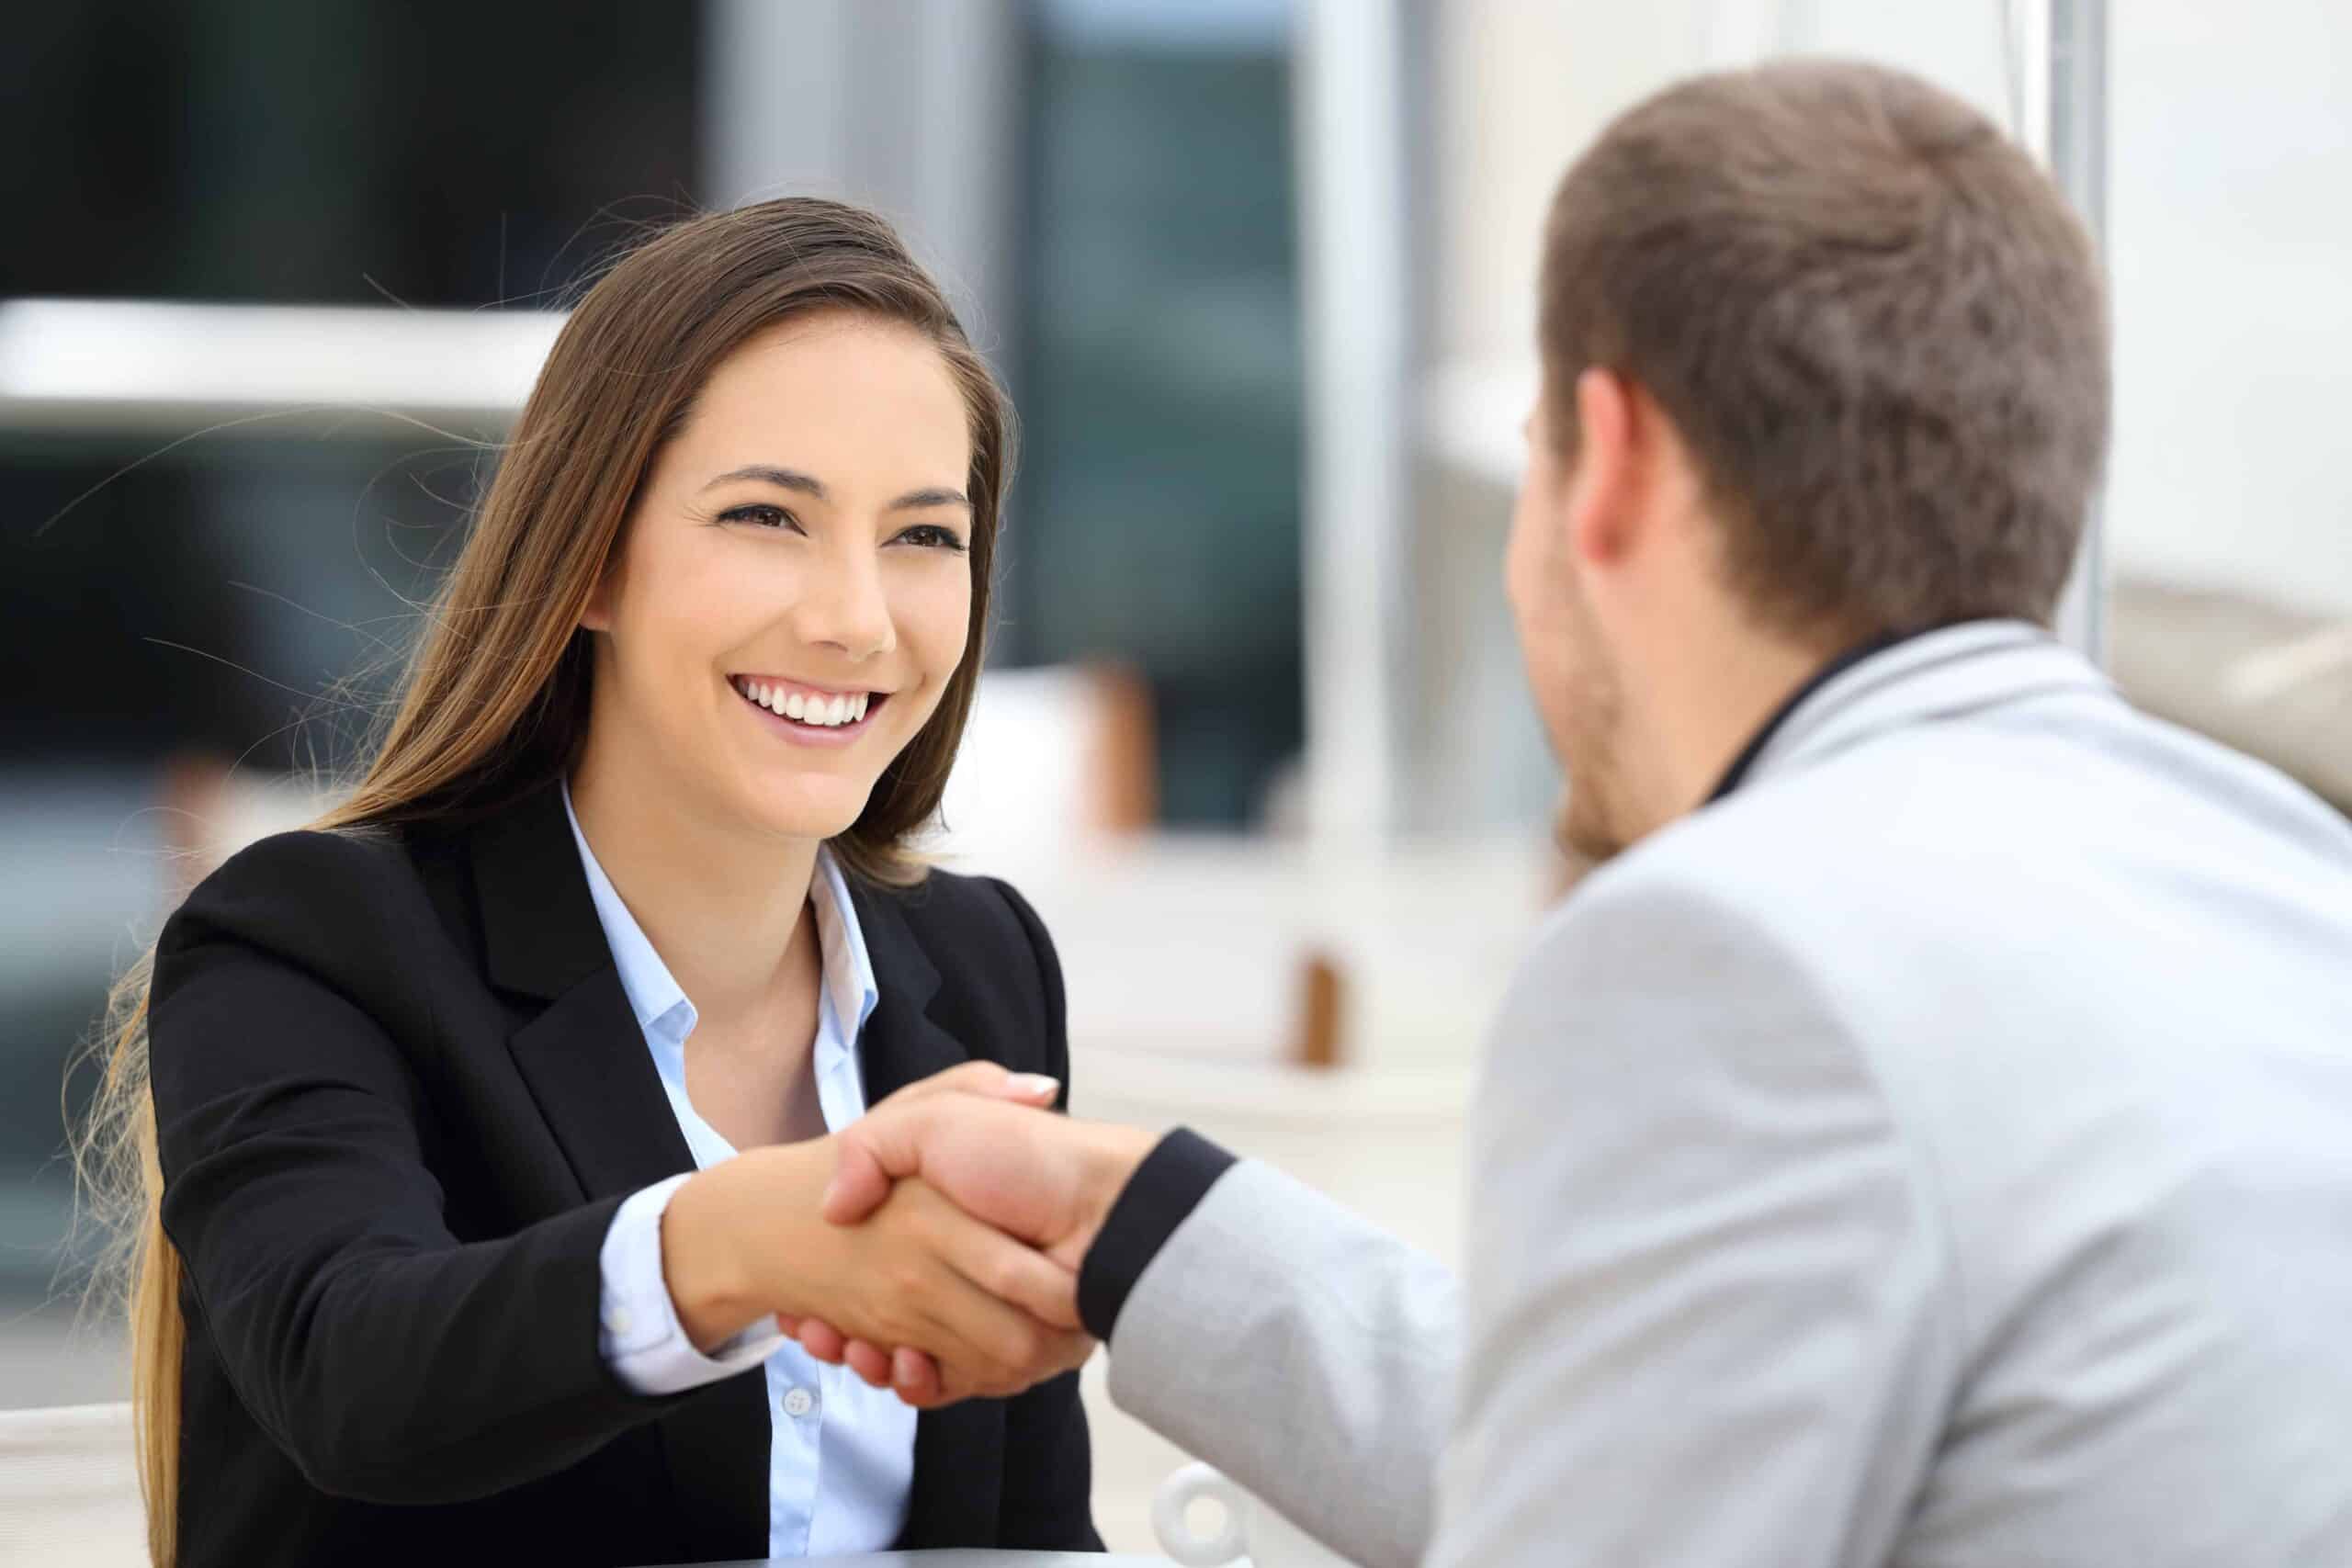 How to Make A Great First Impression: The Five-Step Formula - Interacting  with Co-workers, Personal Polish, Win Friends - Etiquette School of America  | Maralee McKee - Etiquette and Manners for Your Success